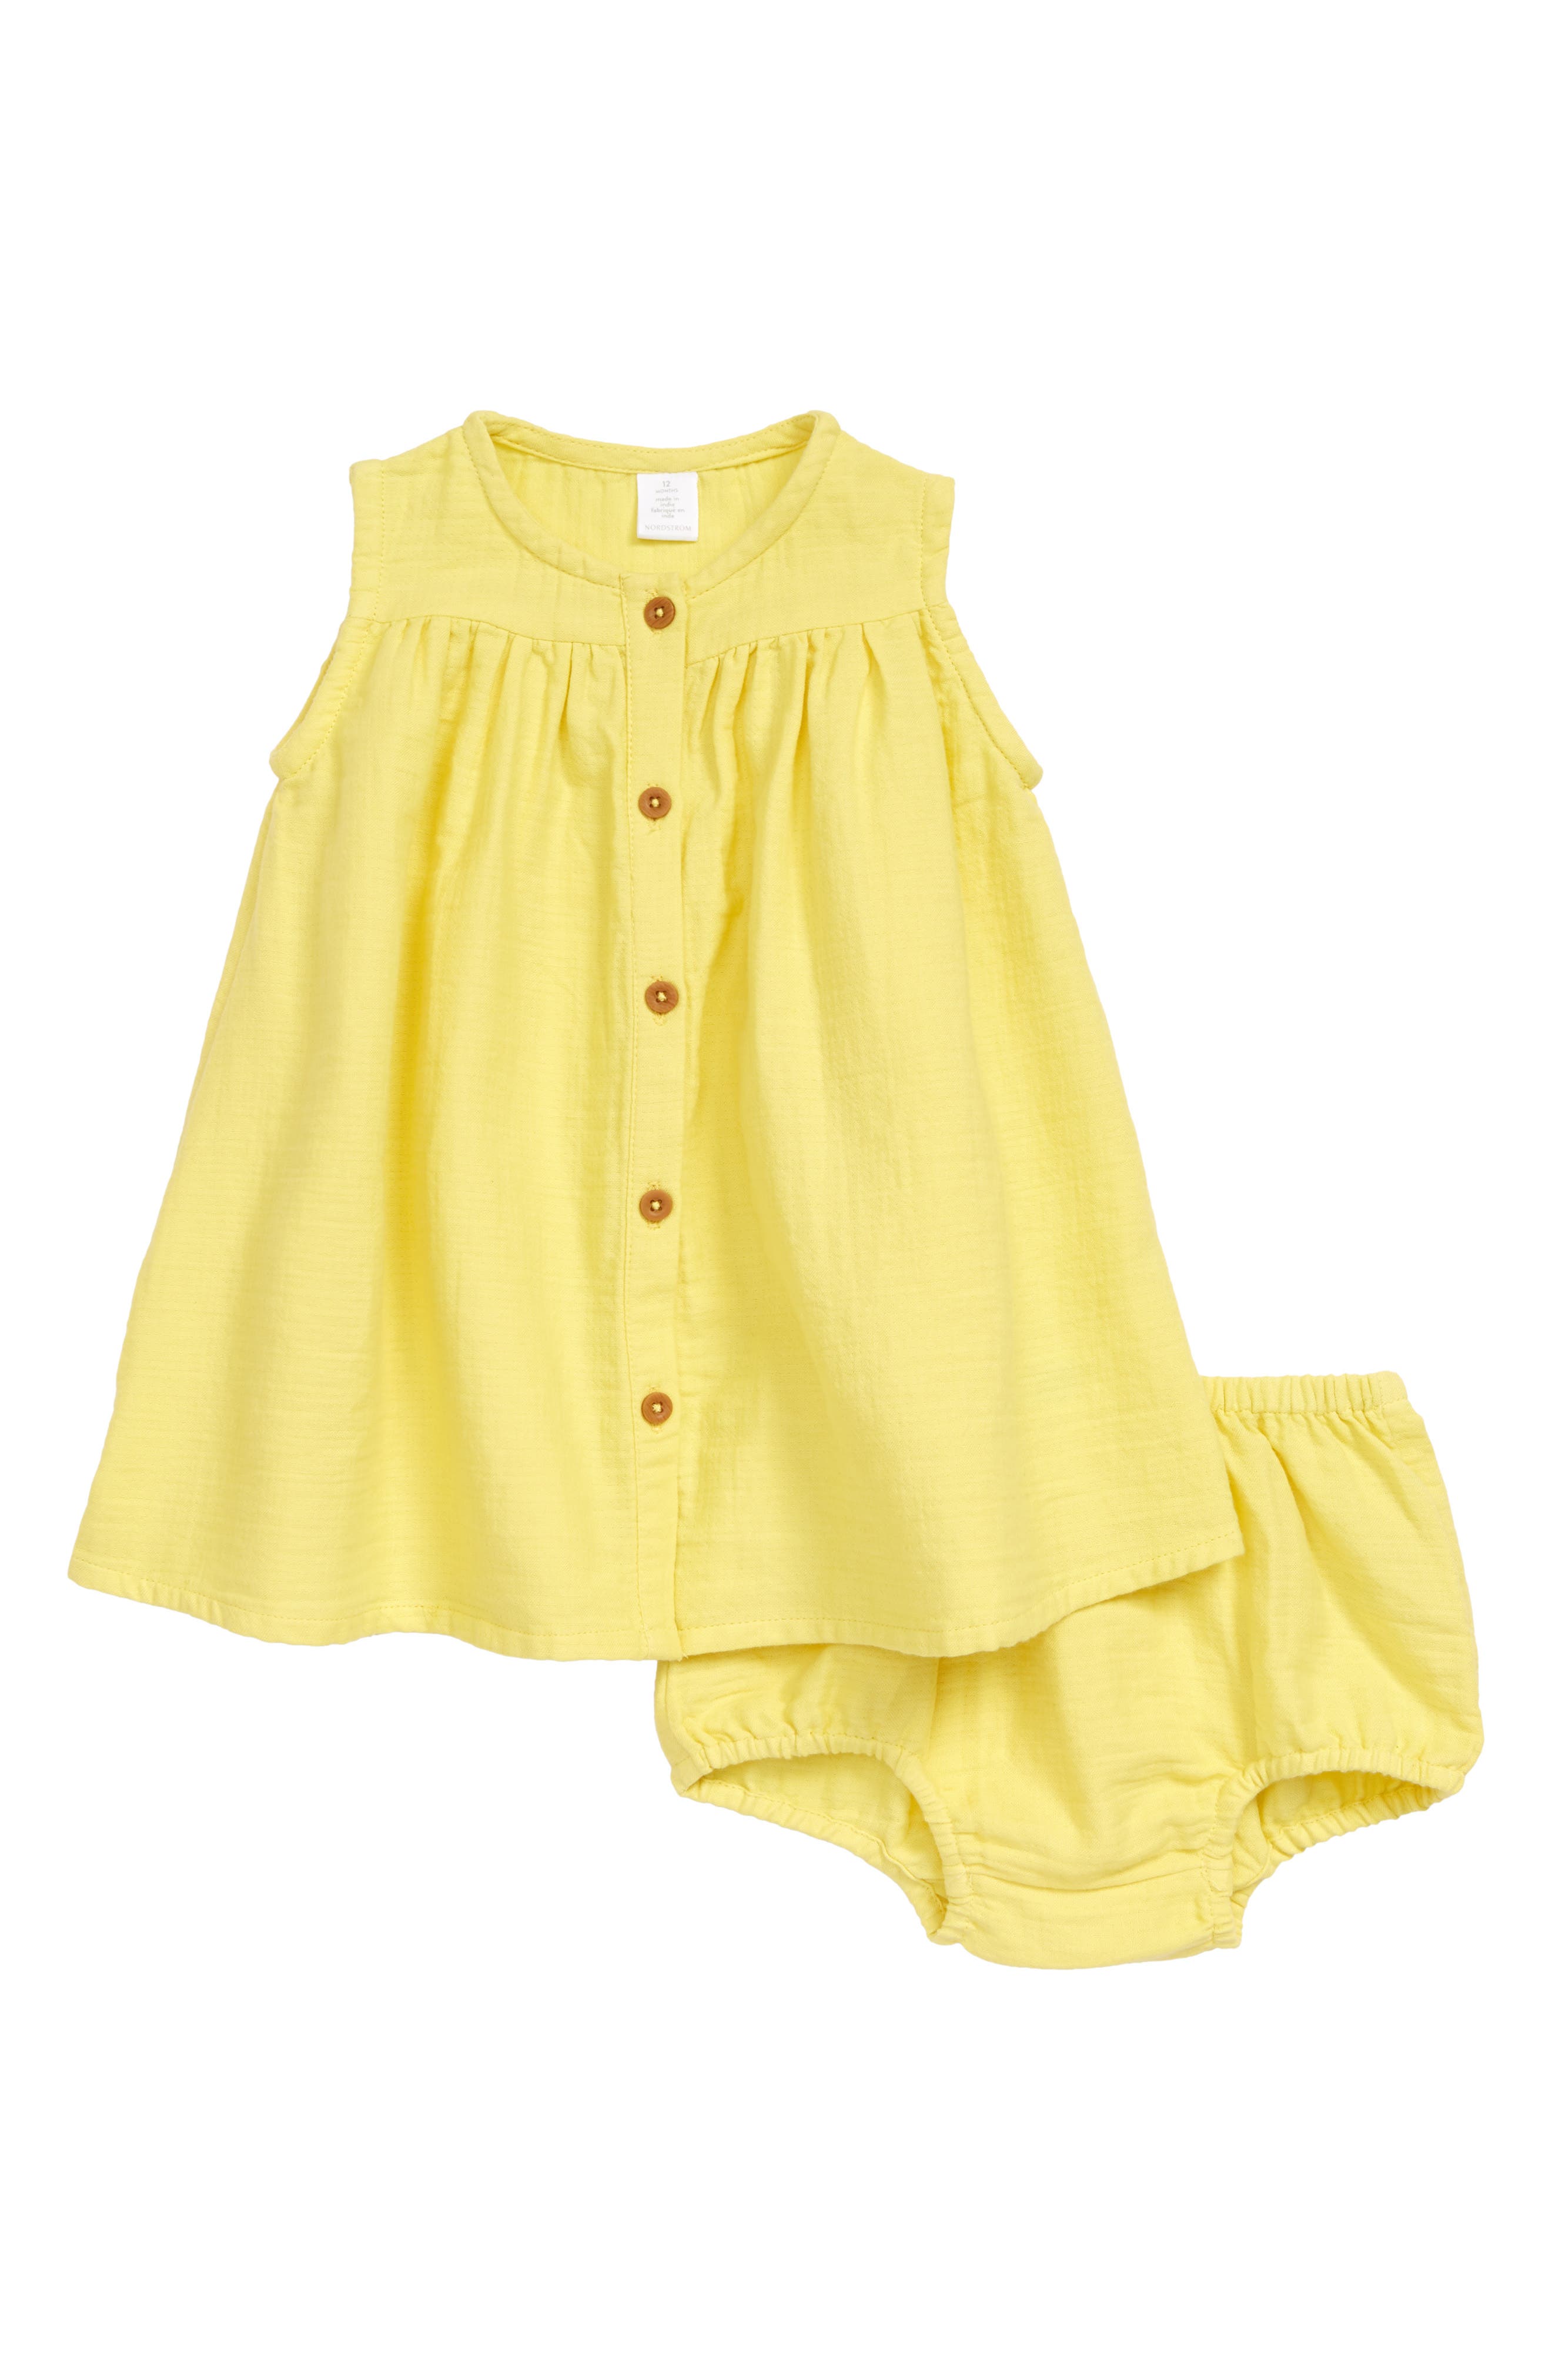 nordstrom baby girl clothes